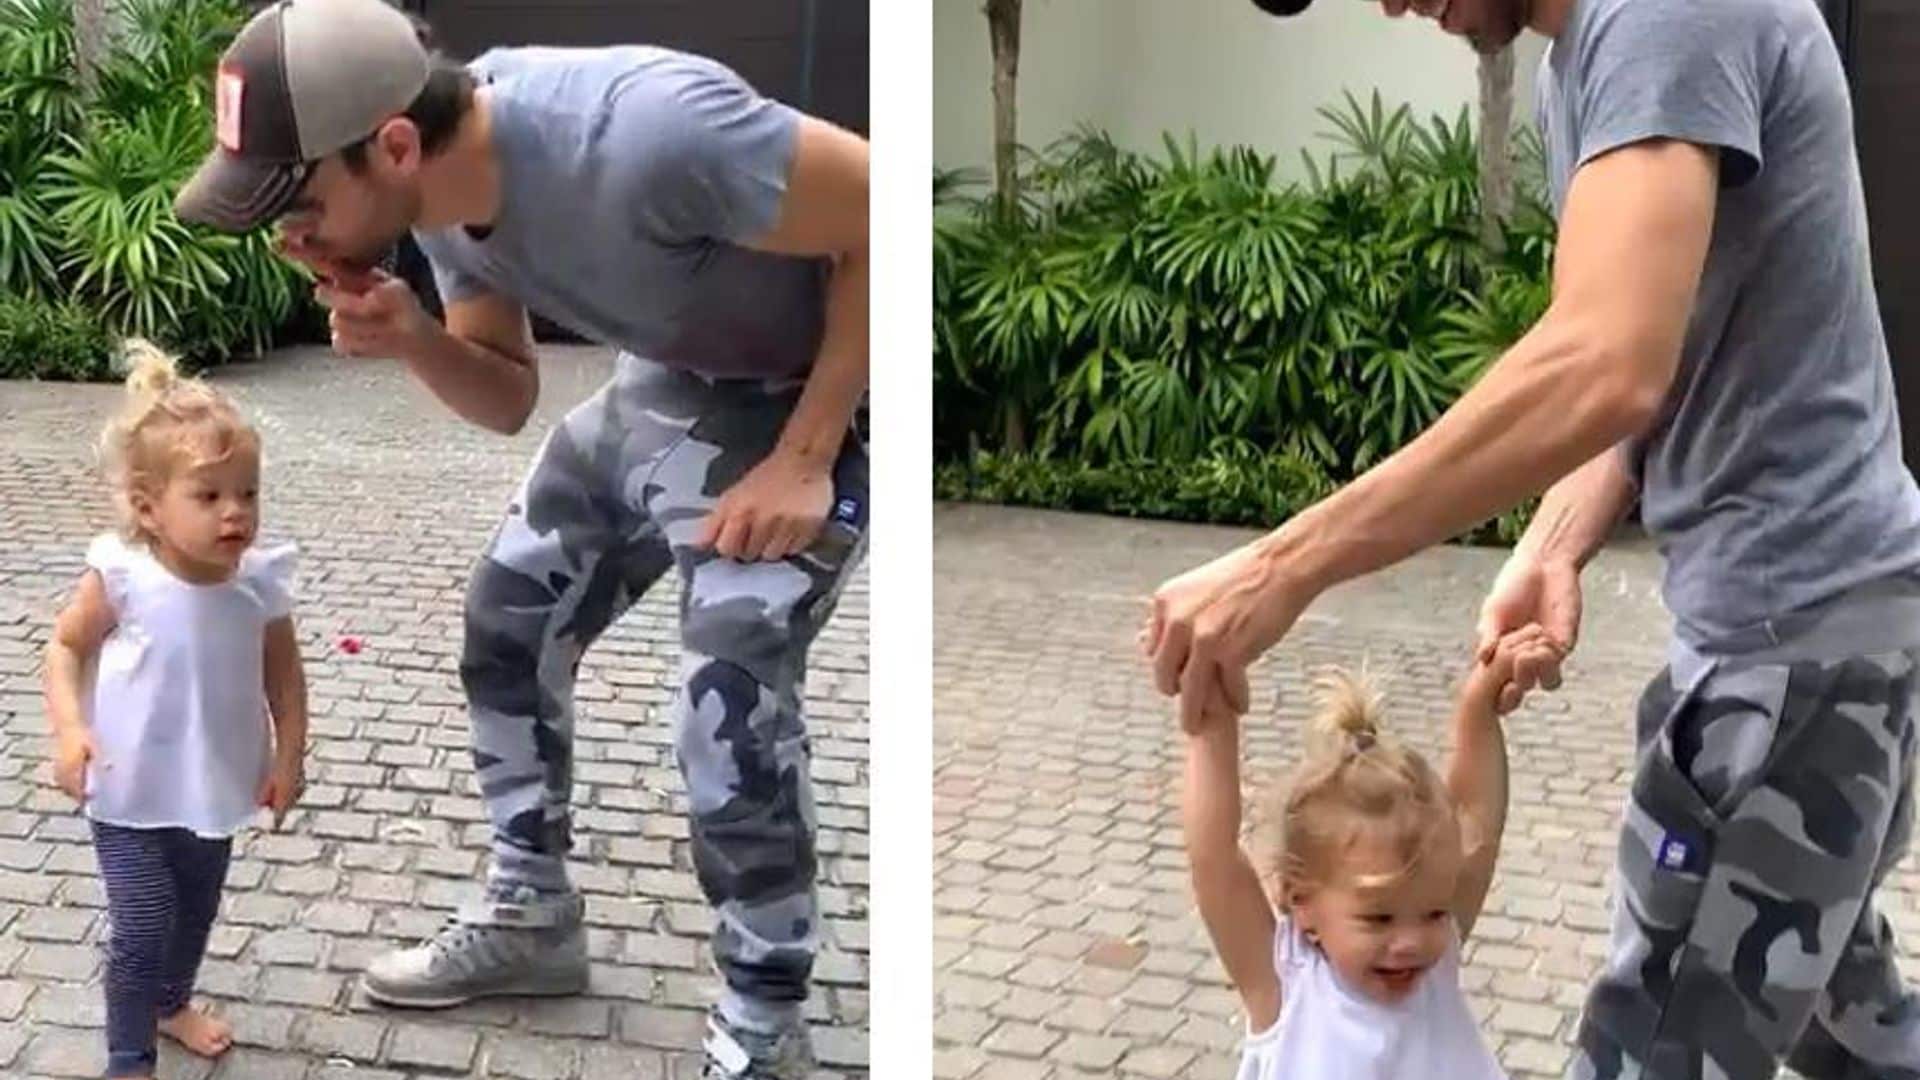 Watch Enrique Iglesias’ adorable video with one-year-old daughter Lucy